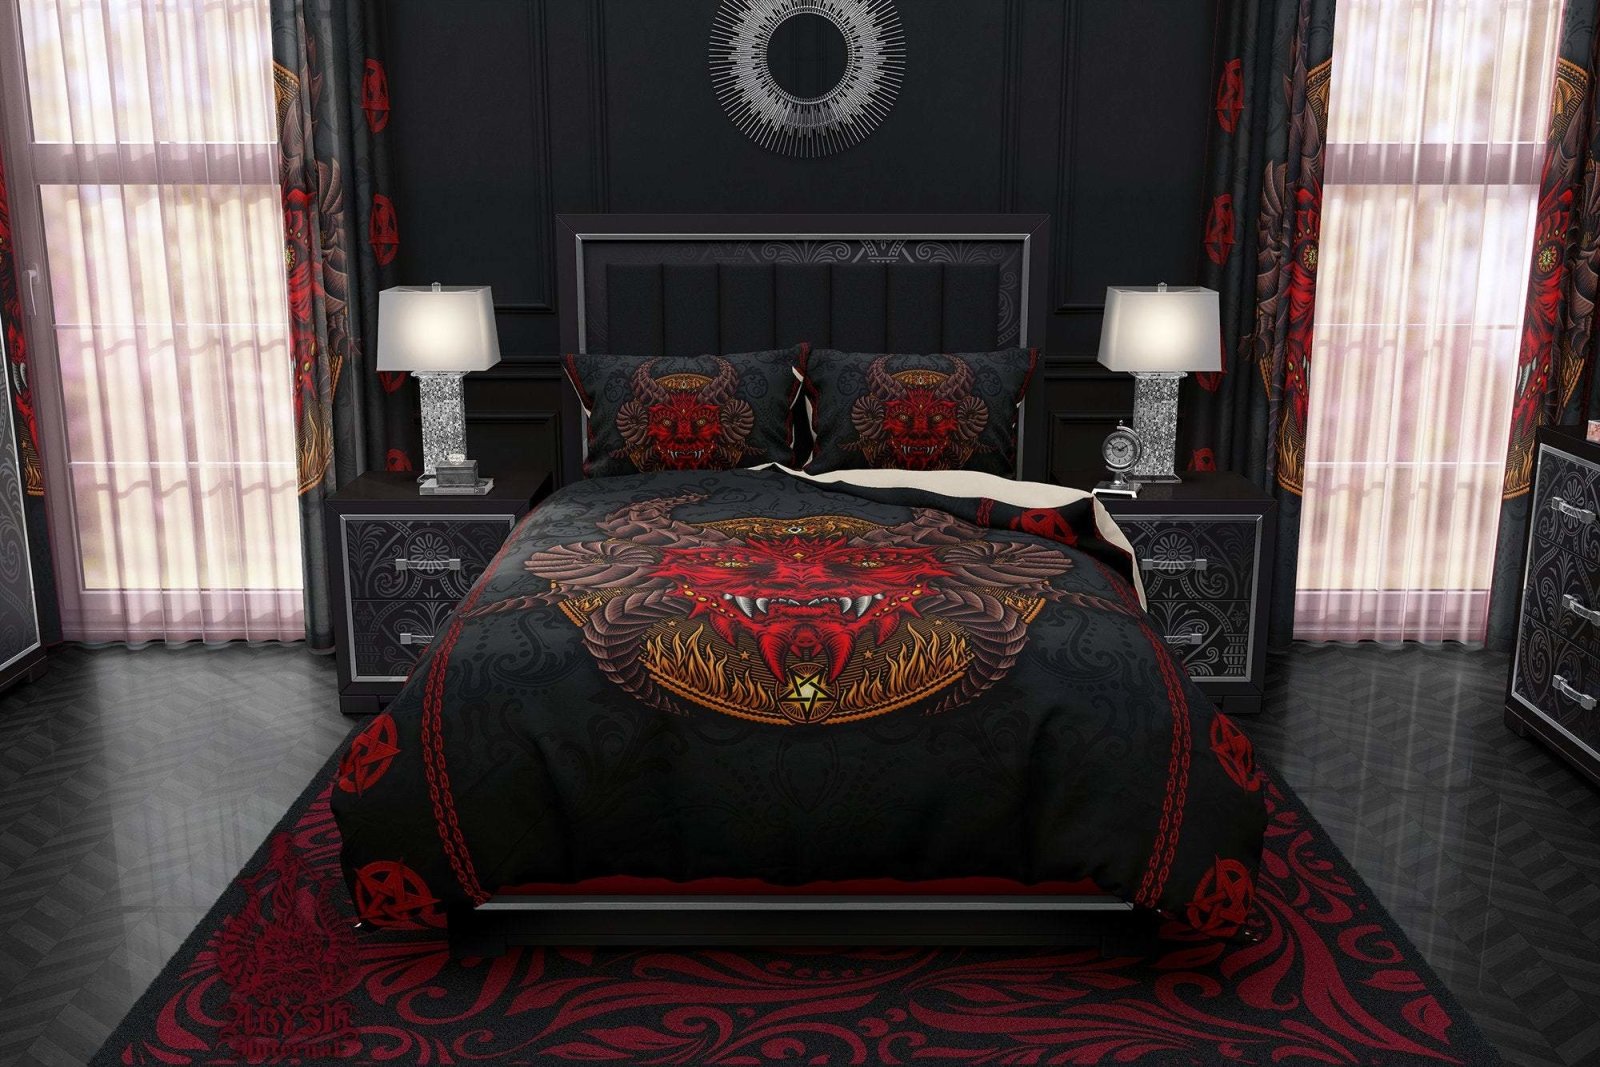 Demon Bedding Set, Comforter and Duvet, Satanic Bed Cover, Alternative Bedroom Decor, King, Queen and Twin Size - Devil - Abysm Internal